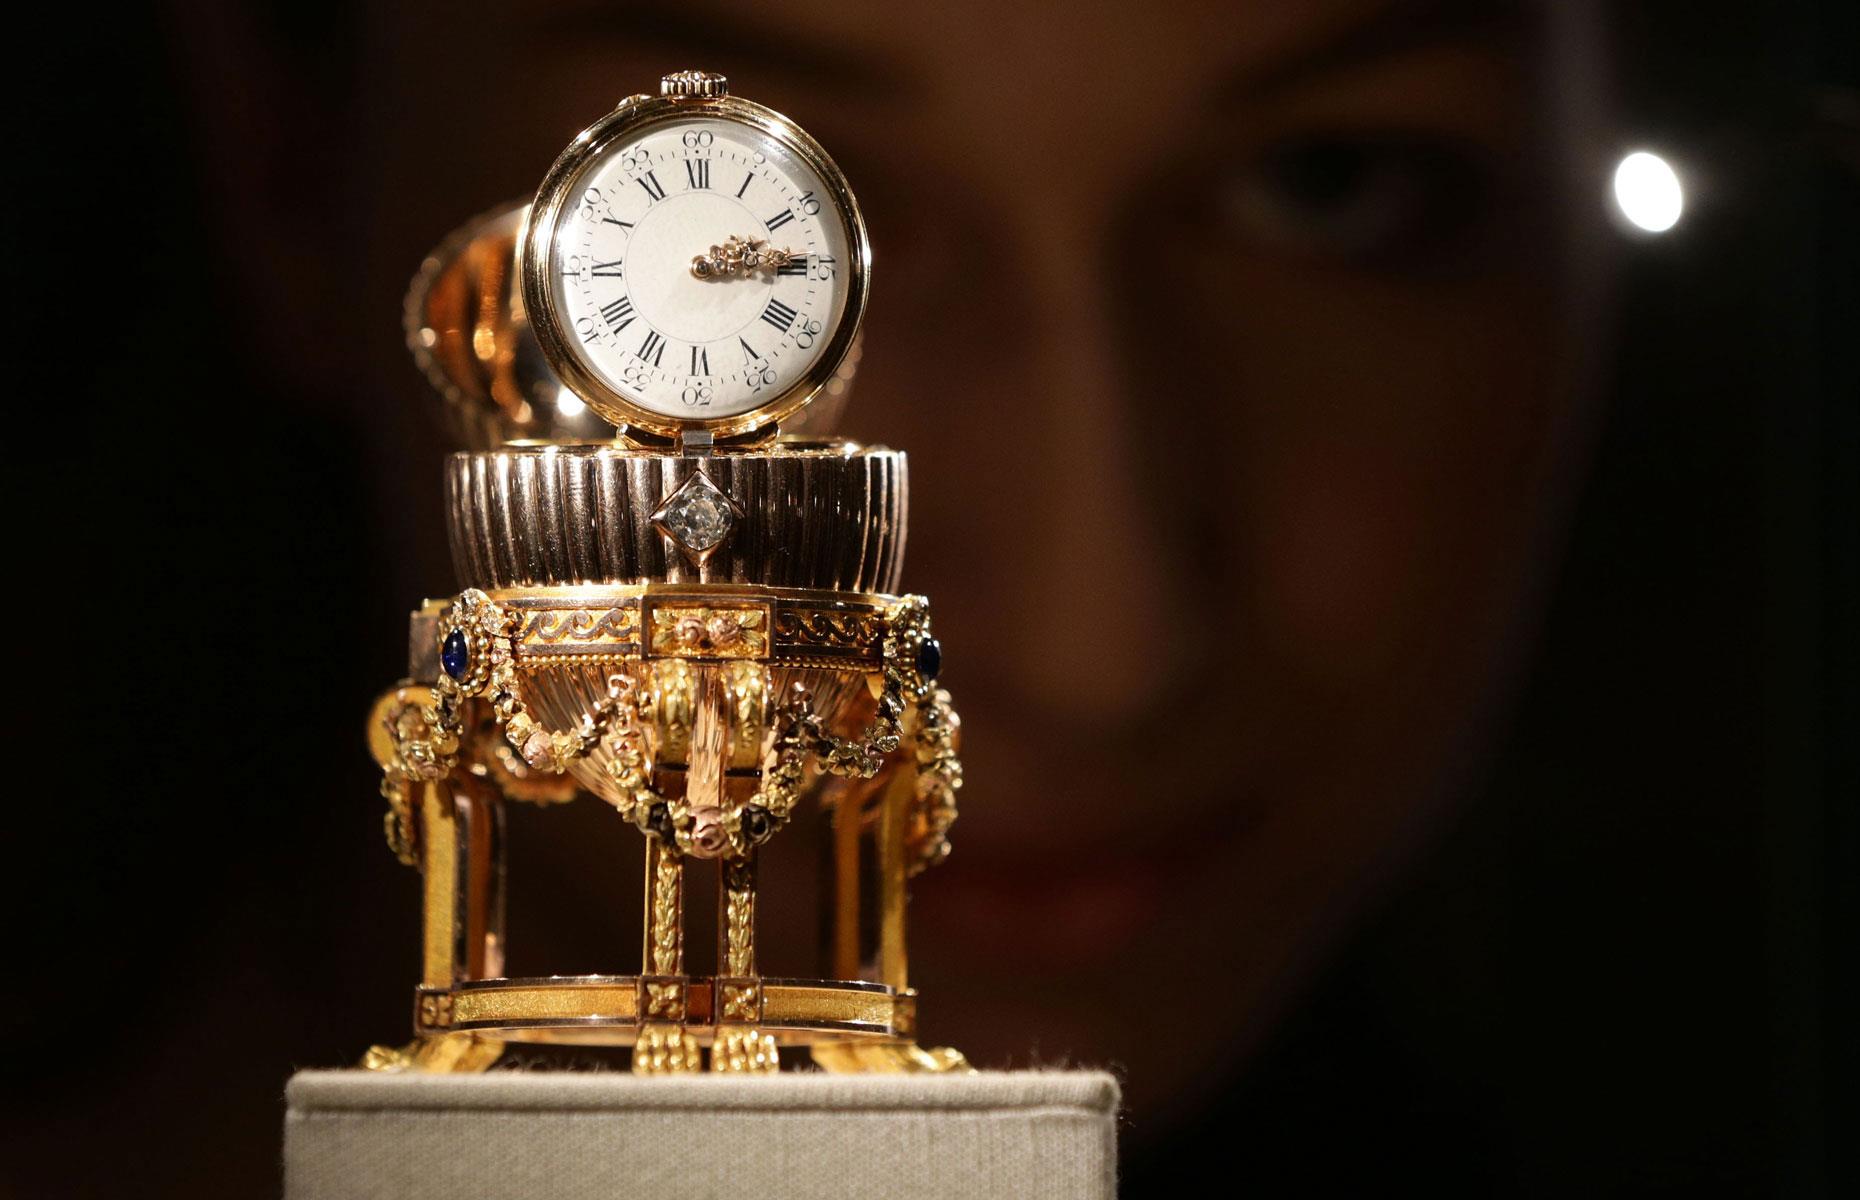 The Third Imperial Fabergé egg worth $33 million (£25.4m)